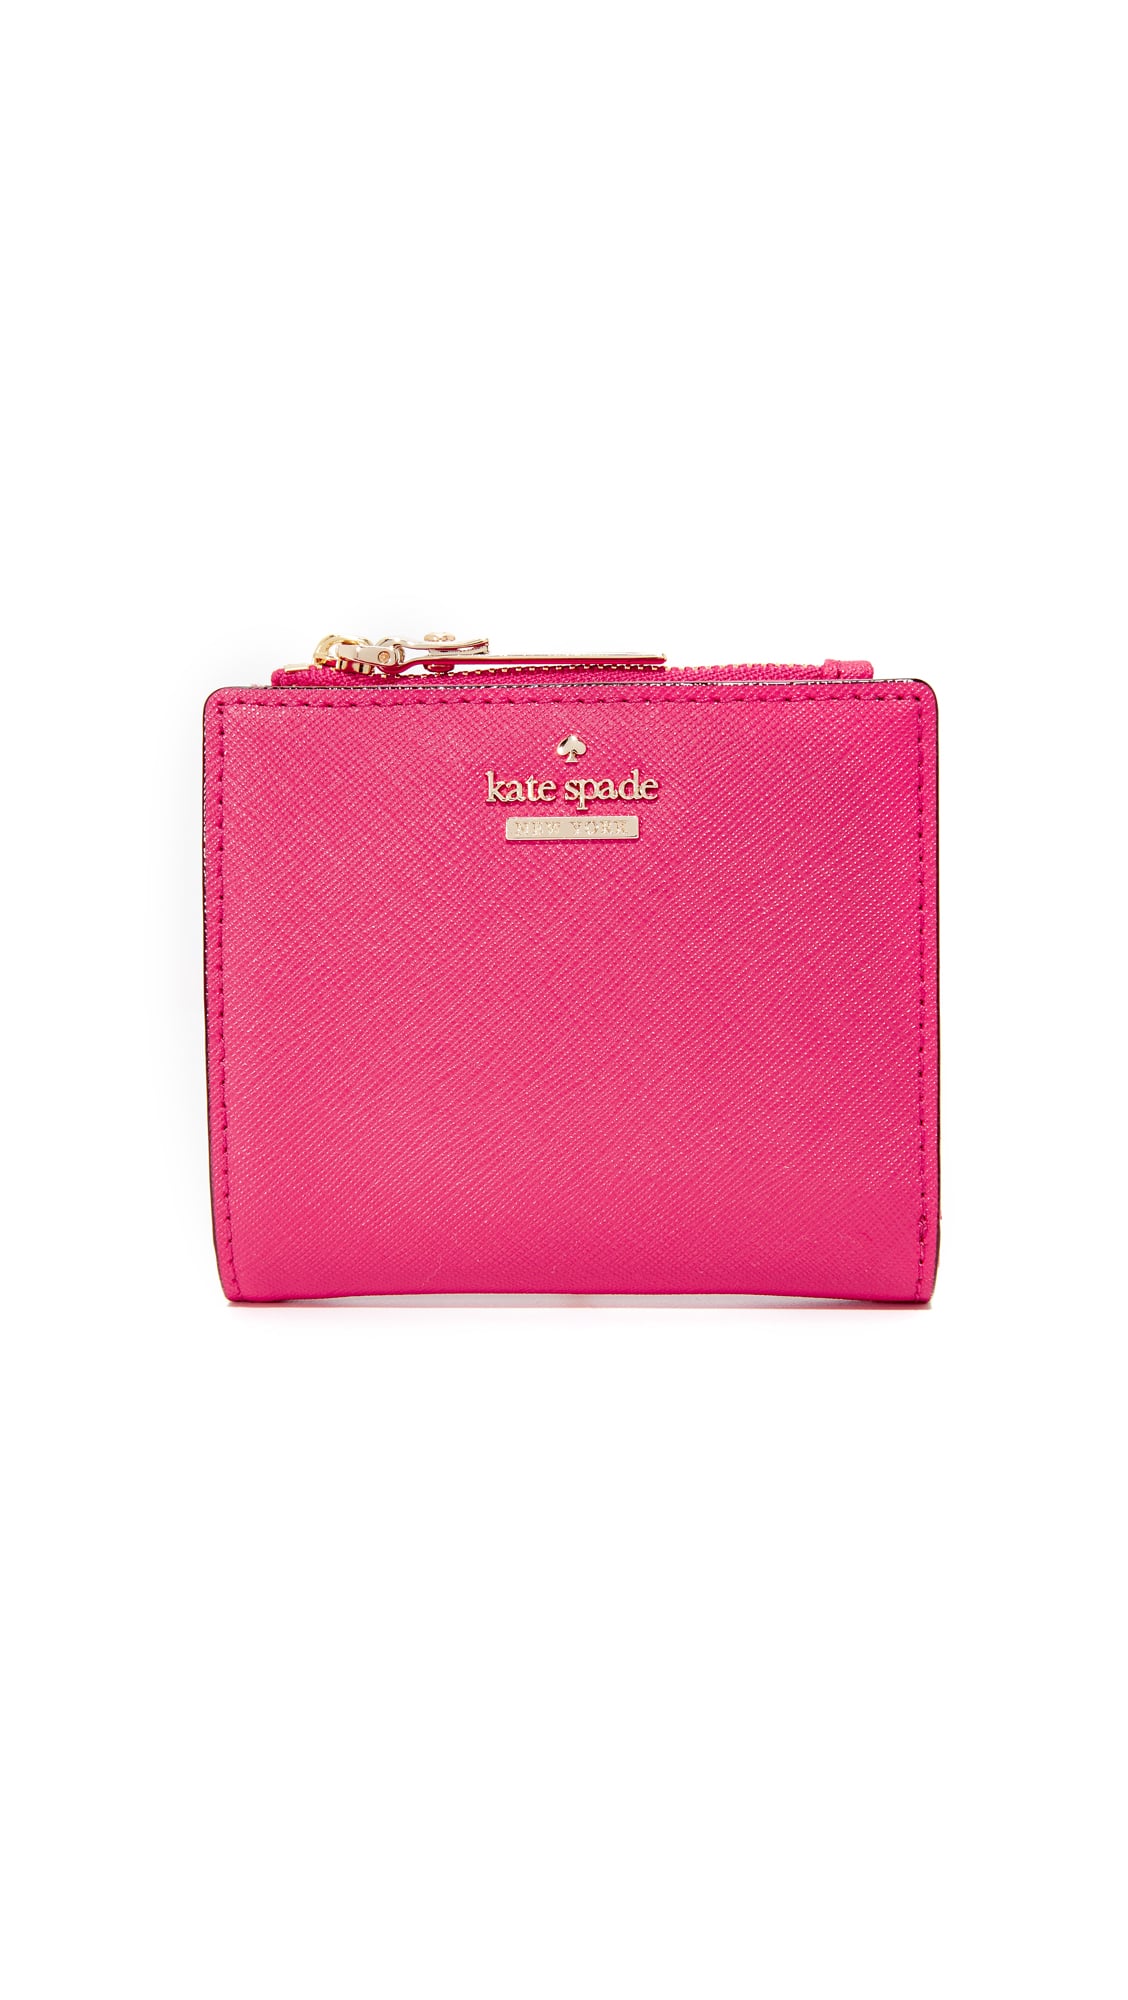 Kate Spade New York Adalyn Small Wallet ($88) True, this beautiful | March  Into Spring at Work With These 6 Adorable Items | POPSUGAR Money & Career  Photo 6